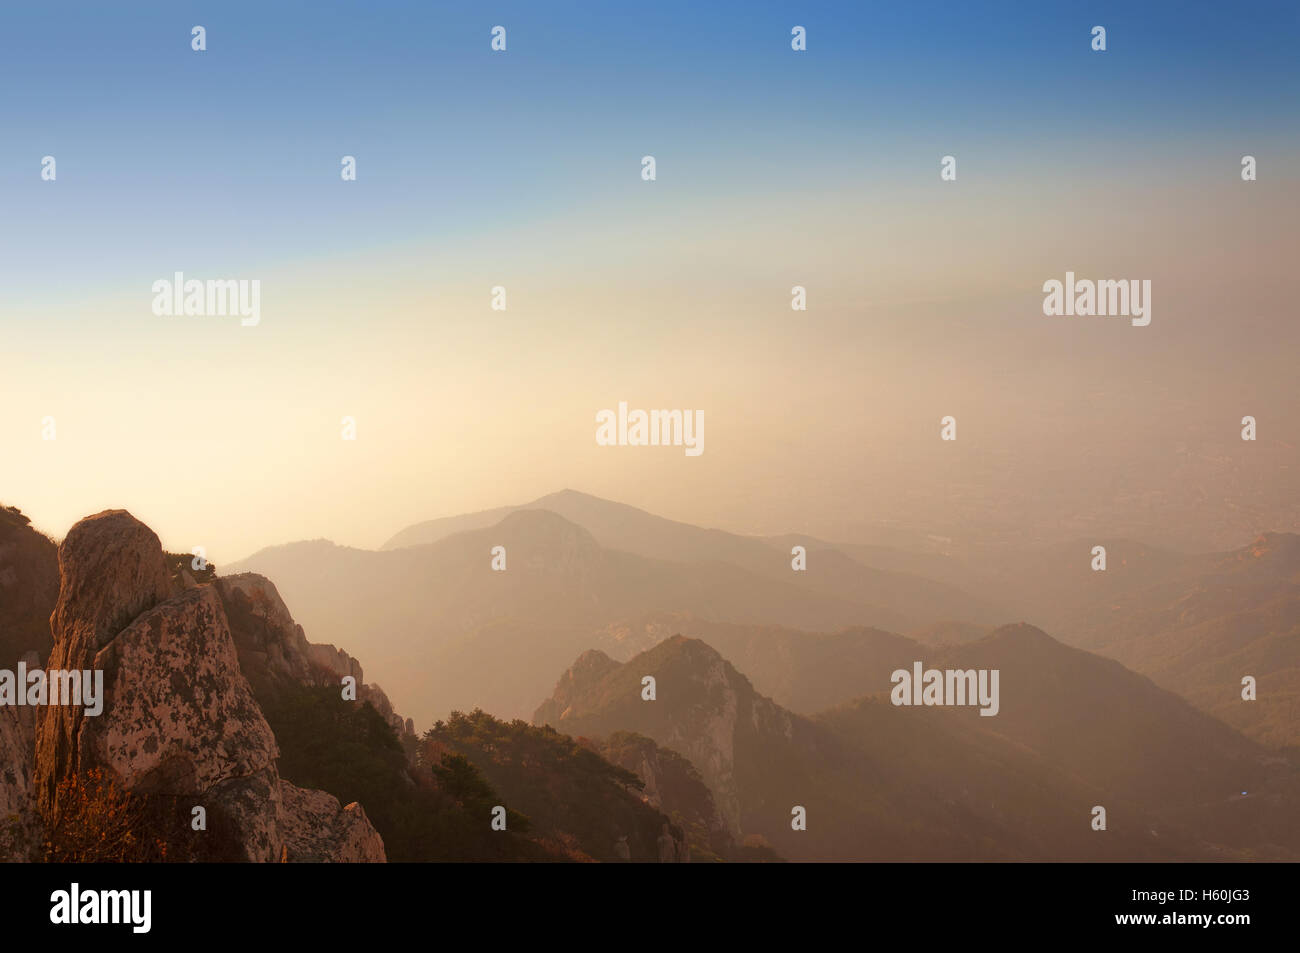 The Taishan Mountain range in the morning light in Shandong province China. Stock Photo